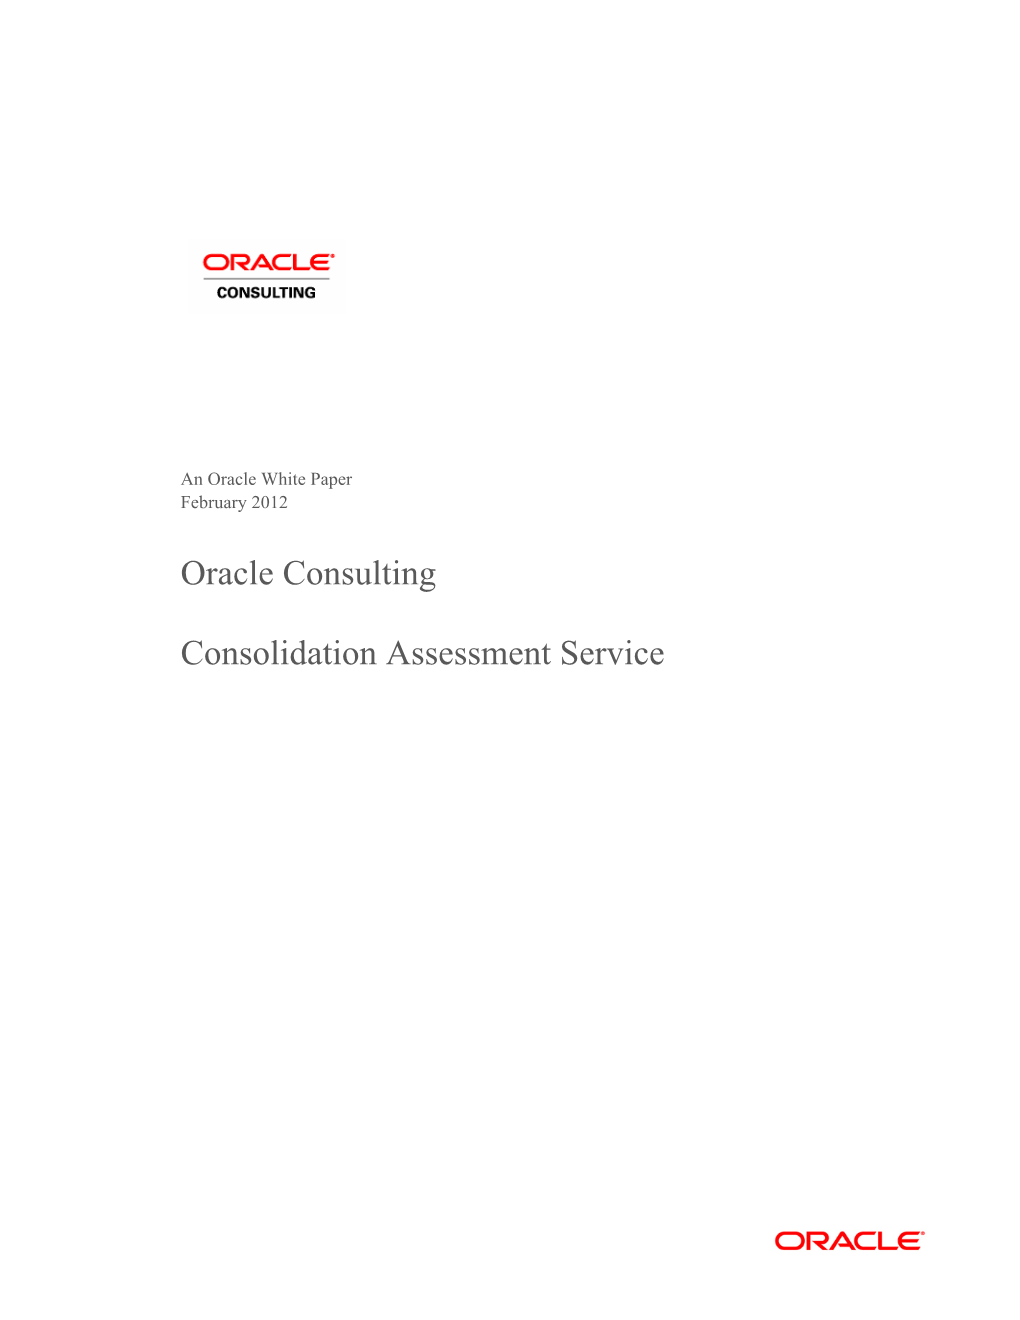 Oracle Consulting: Consolidation Assessment Services